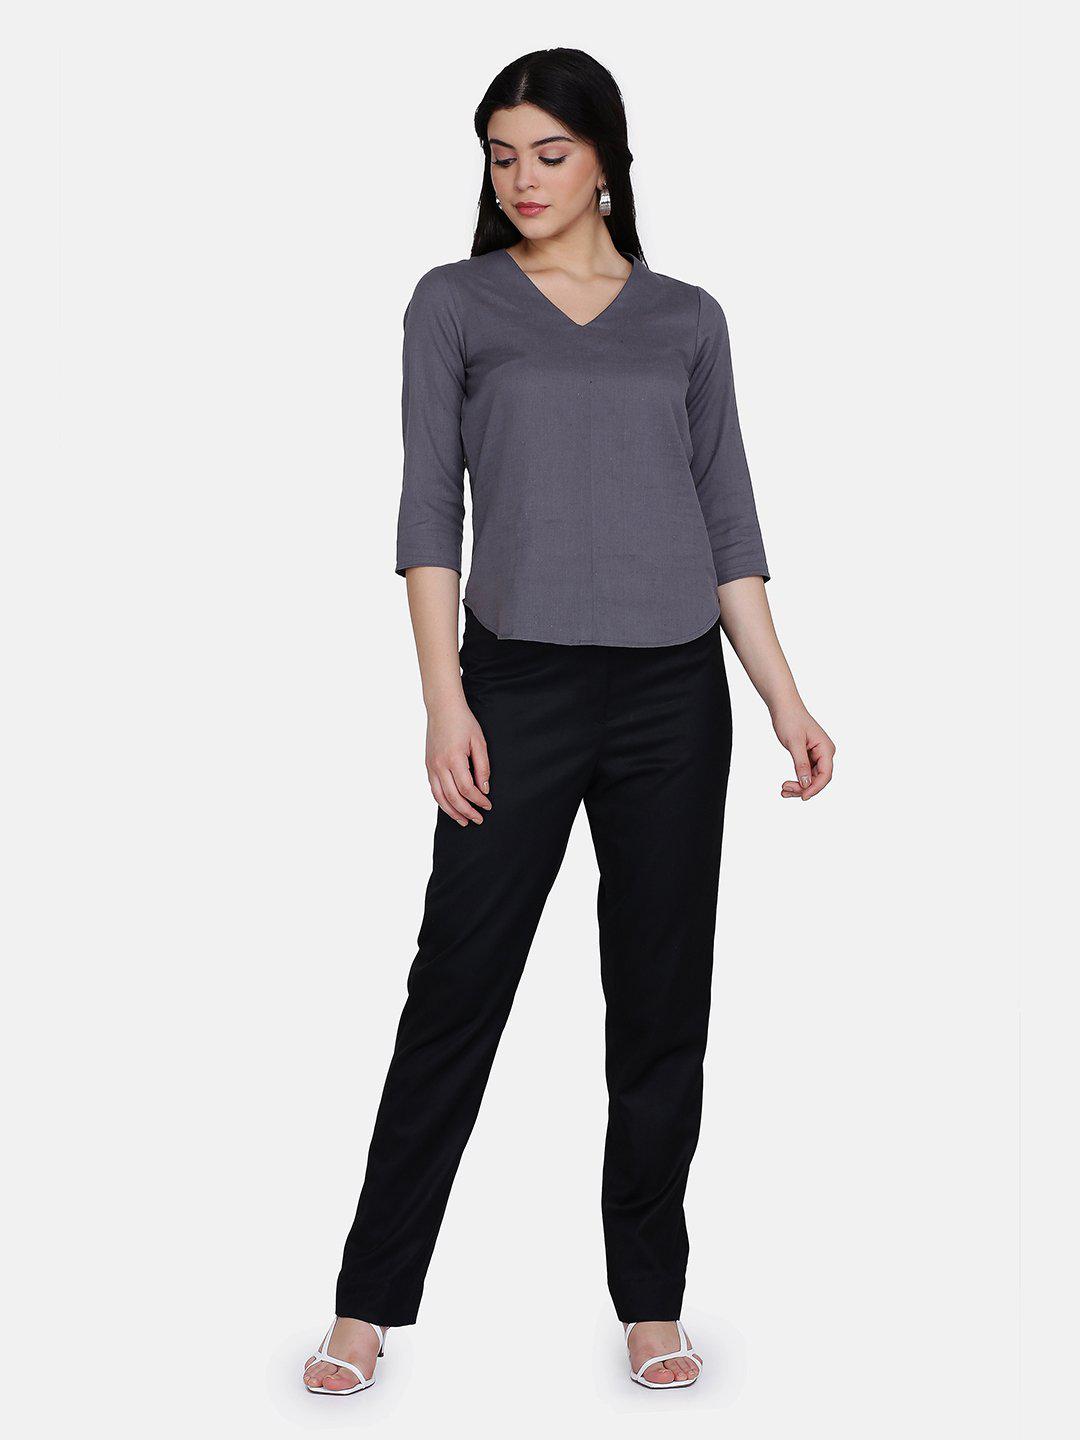 Cotton Top For Women - Charcoal Grey